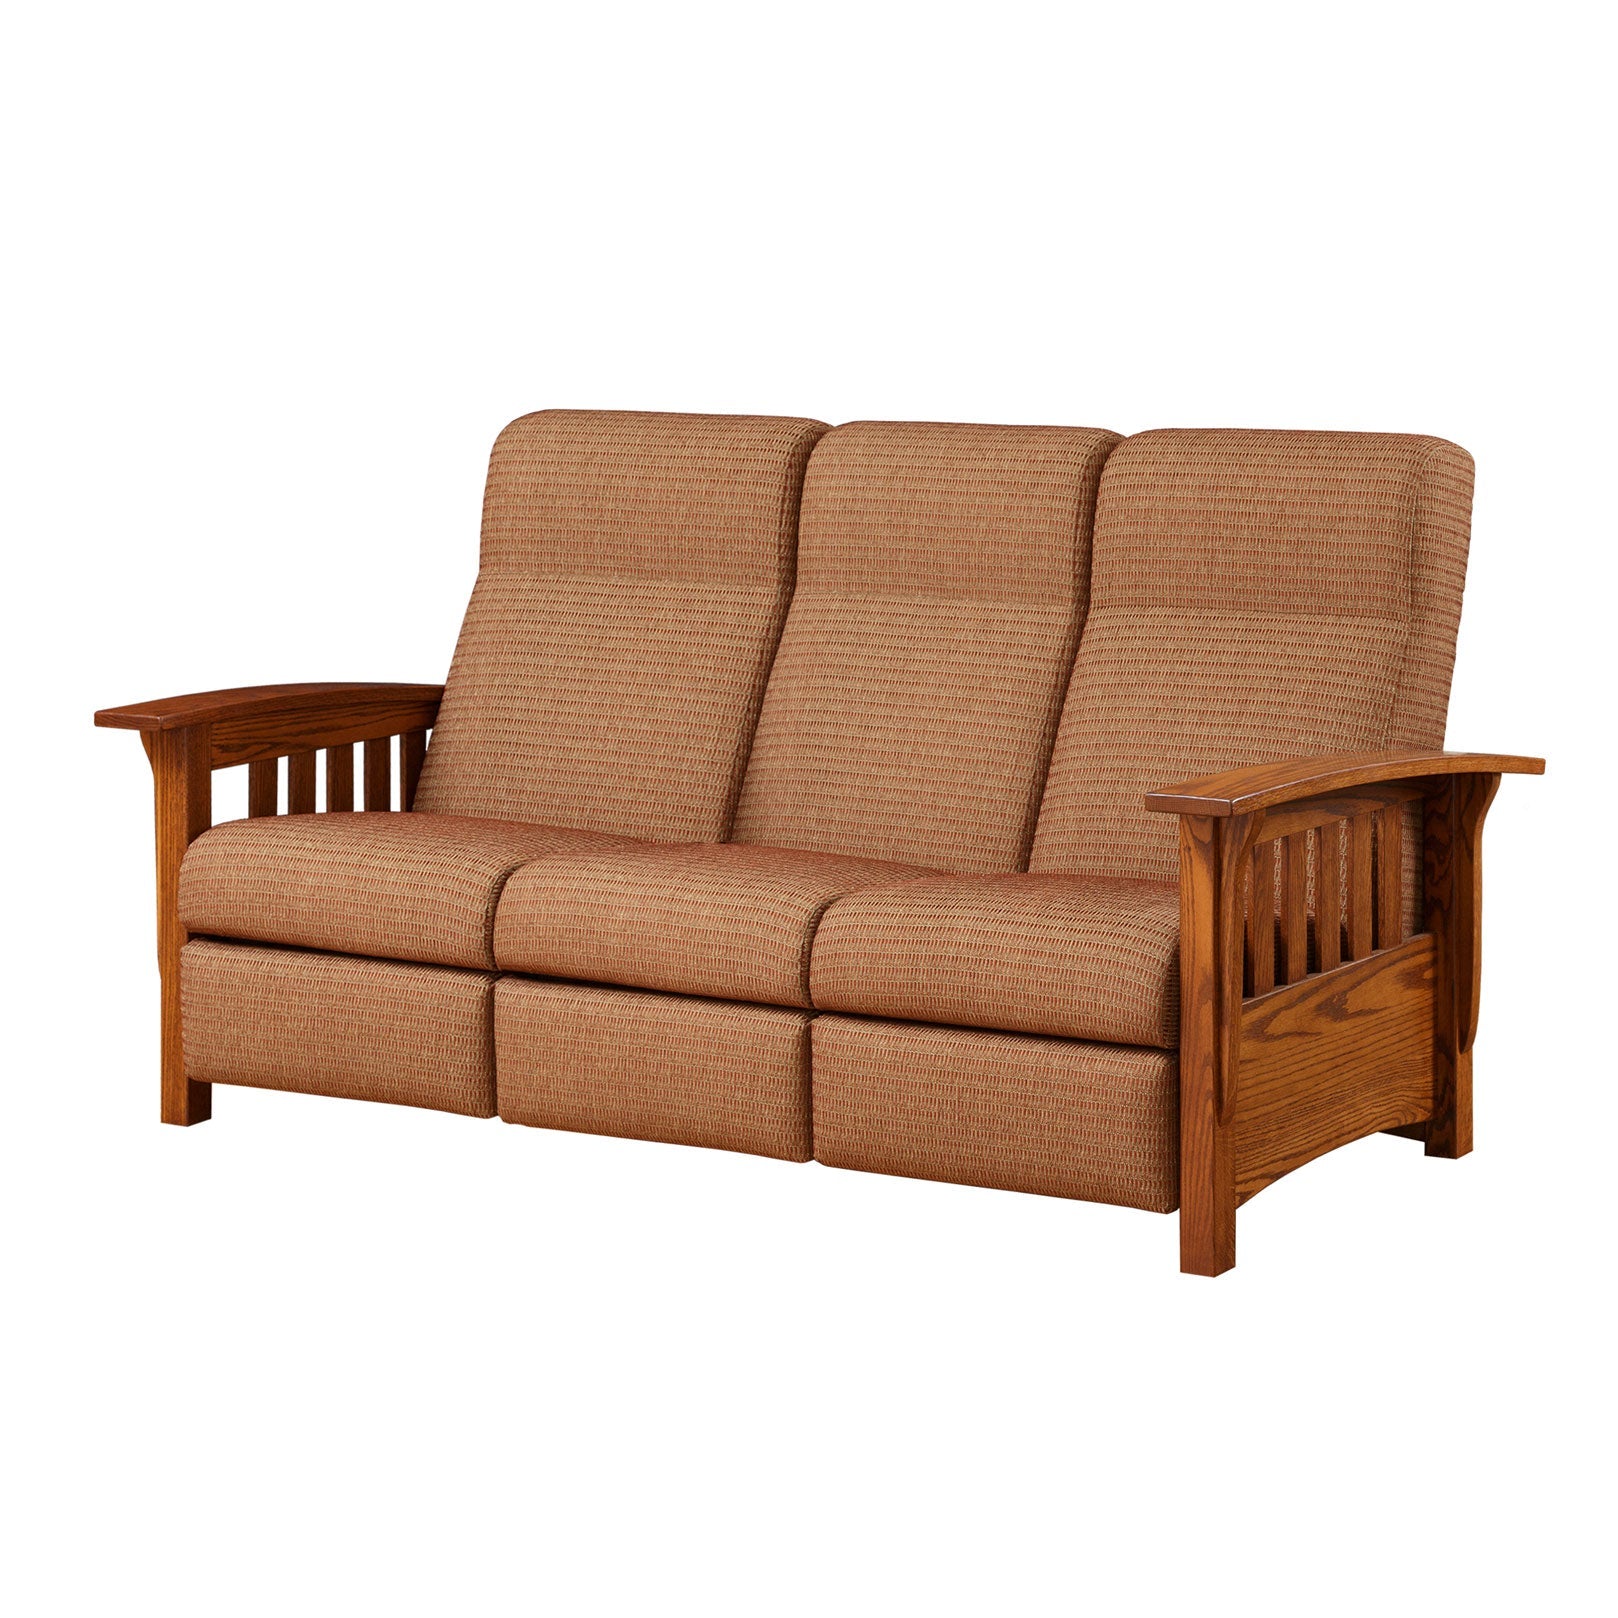 Amish Classic Mission Recliner Sofa - snyders.furniture